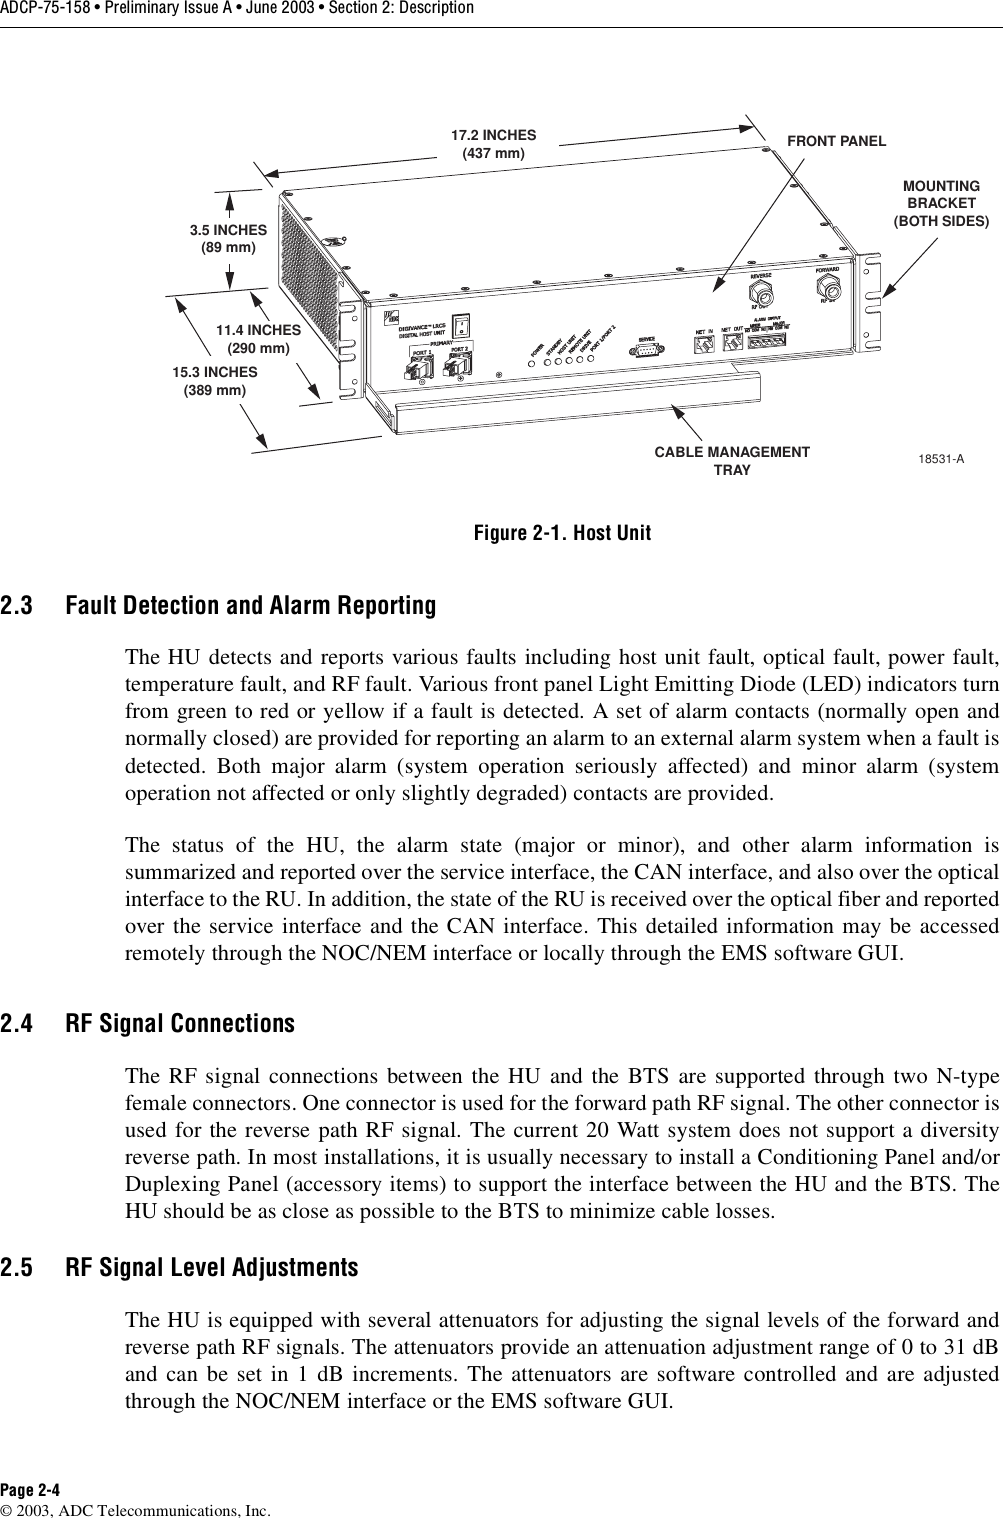 ADCP-75-158 • Preliminary Issue A • June 2003 • Section 2: DescriptionPage 2-4© 2003, ADC Telecommunications, Inc.Figure 2-1. Host Unit2.3 Fault Detection and Alarm ReportingThe HU detects and reports various faults including host unit fault, optical fault, power fault,temperature fault, and RF fault. Various front panel Light Emitting Diode (LED) indicators turnfrom green to red or yellow if a fault is detected. A set of alarm contacts (normally open andnormally closed) are provided for reporting an alarm to an external alarm system when a fault isdetected. Both major alarm (system operation seriously affected) and minor alarm (systemoperation not affected or only slightly degraded) contacts are provided. The status of the HU, the alarm state (major or minor), and other alarm information issummarized and reported over the service interface, the CAN interface, and also over the opticalinterface to the RU. In addition, the state of the RU is received over the optical fiber and reportedover the service interface and the CAN interface. This detailed information may be accessedremotely through the NOC/NEM interface or locally through the EMS software GUI. 2.4 RF Signal ConnectionsThe RF signal connections between the HU and the BTS are supported through two N-typefemale connectors. One connector is used for the forward path RF signal. The other connector isused for the reverse path RF signal. The current 20 Watt system does not support a diversityreverse path. In most installations, it is usually necessary to install a Conditioning Panel and/orDuplexing Panel (accessory items) to support the interface between the HU and the BTS. TheHU should be as close as possible to the BTS to minimize cable losses. 2.5 RF Signal Level AdjustmentsThe HU is equipped with several attenuators for adjusting the signal levels of the forward andreverse path RF signals. The attenuators provide an attenuation adjustment range of 0 to 31 dBand can be set in 1 dB increments. The attenuators are software controlled and are adjustedthrough the NOC/NEM interface or the EMS software GUI. 17.2 INCHES(437 mm)3.5 INCHES(89 mm)11.4 INCHES(290 mm)15.3 INCHES(389 mm)FRONT PANELCABLE MANAGEMENTTRAYMOUNTINGBRACKET(BOTH SIDES)18531-A